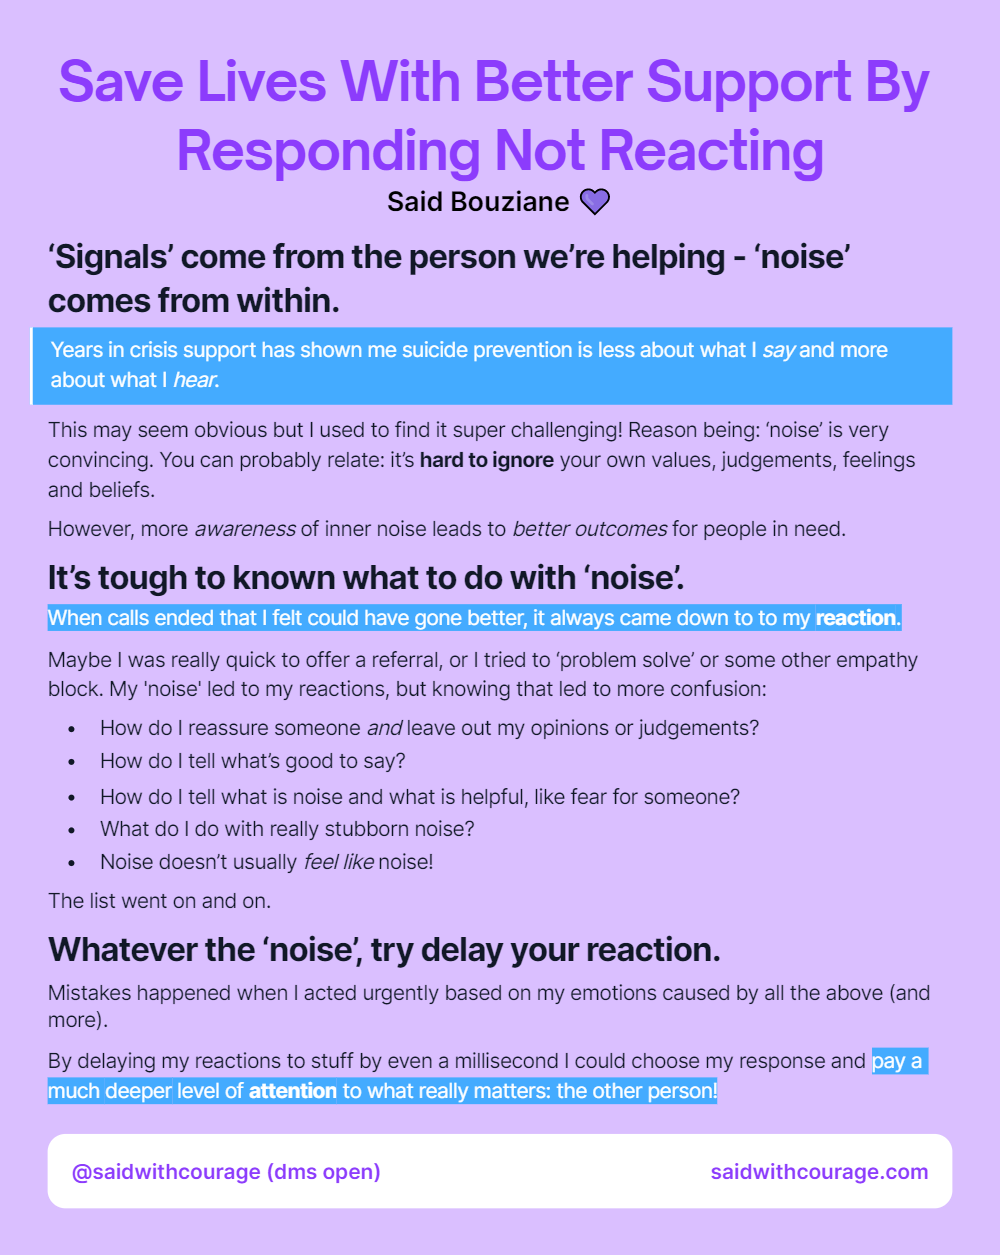 Save Lives With Better Support By Responding Not Reacting